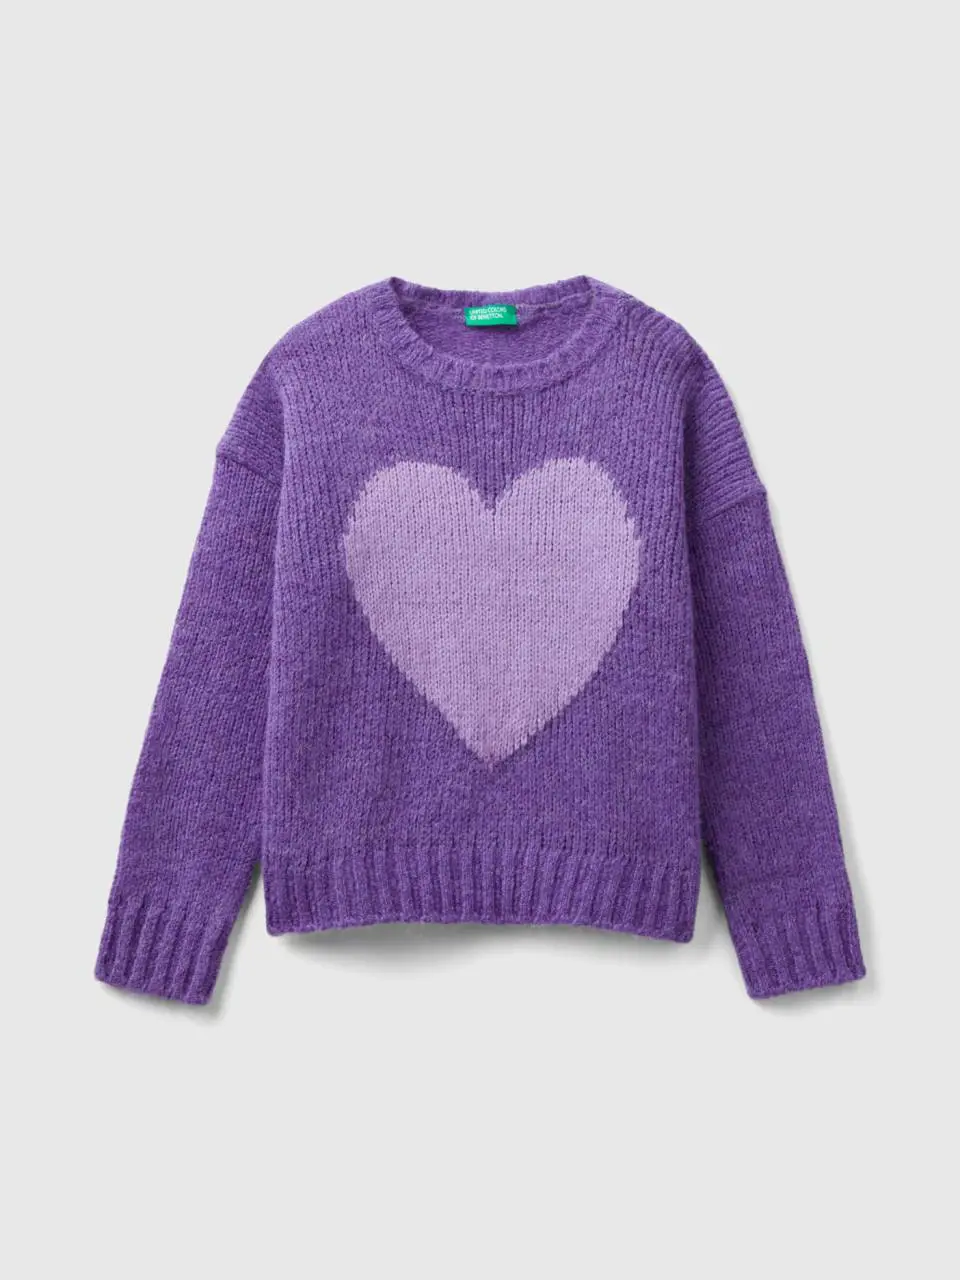 Benetton sweater with heart inlay. 1